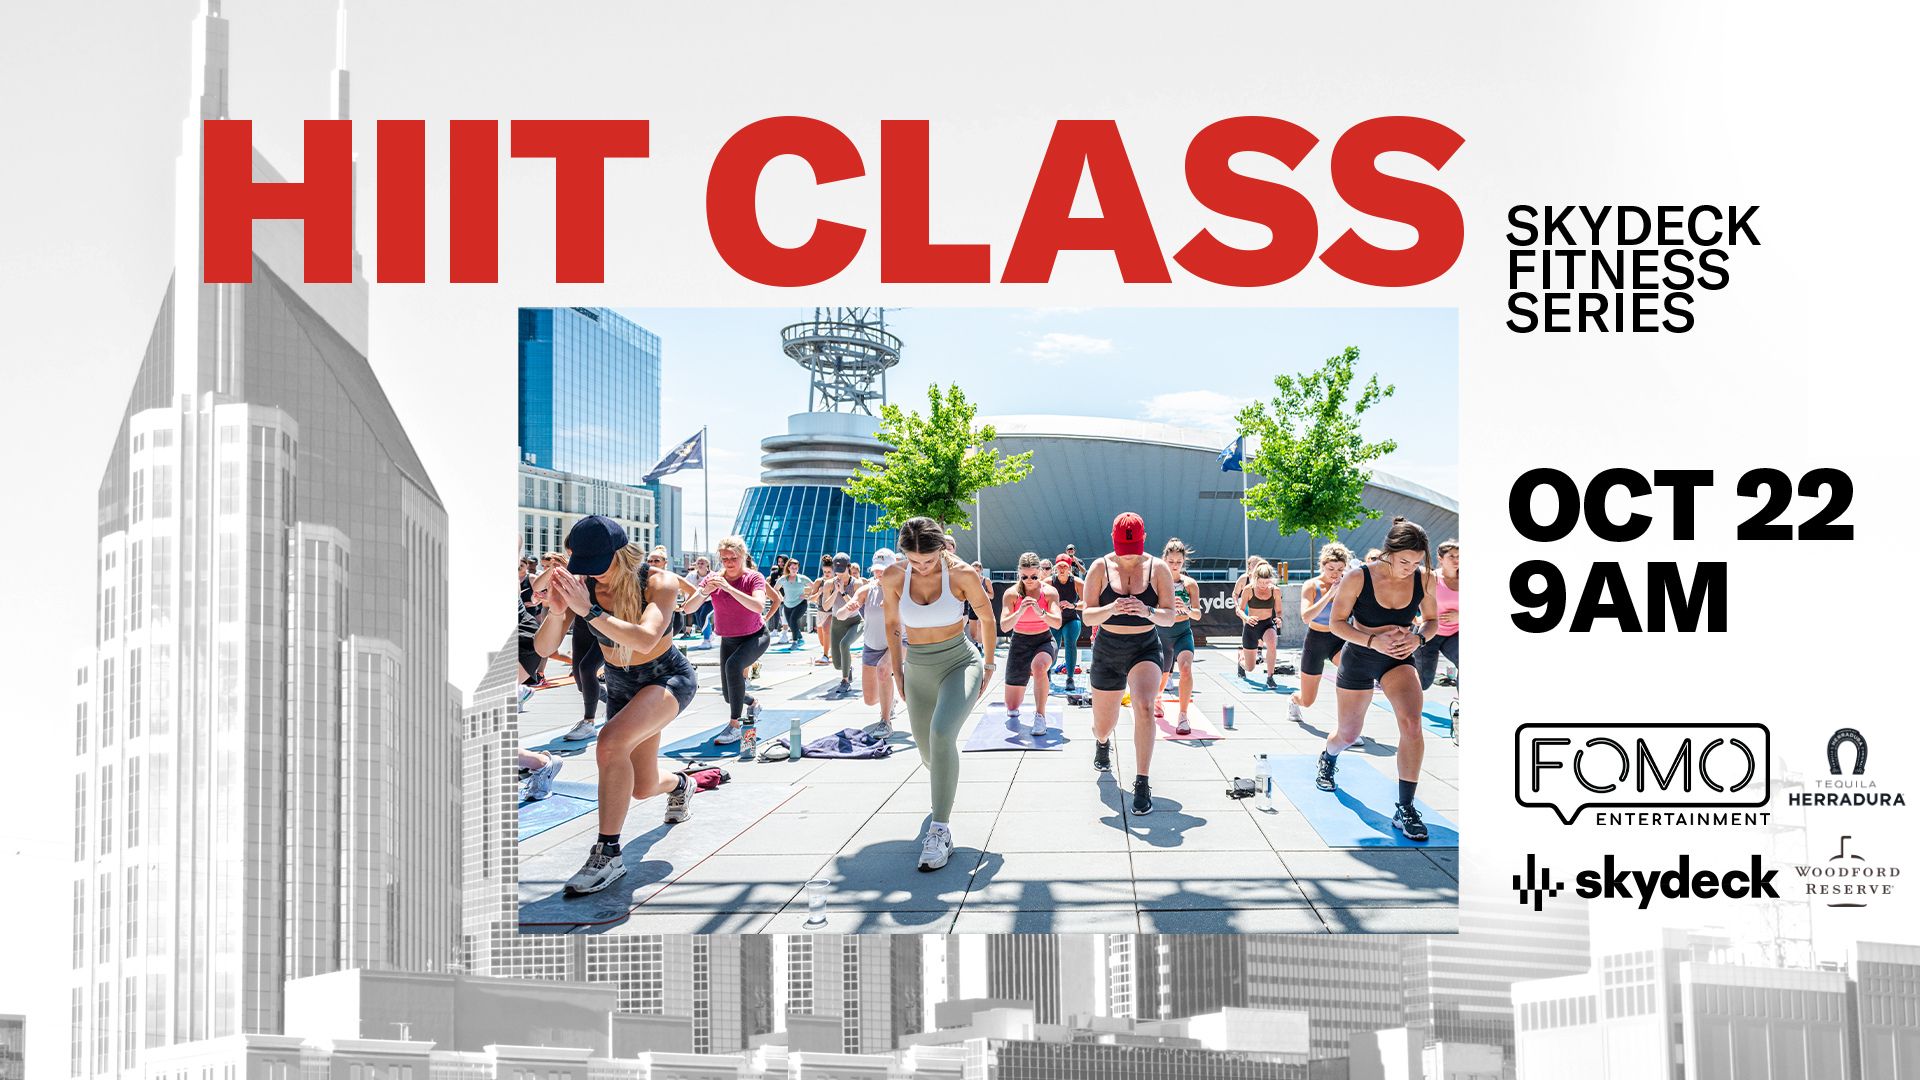 Promo image of Skydeck Fitness Series | FOMO Entertainment